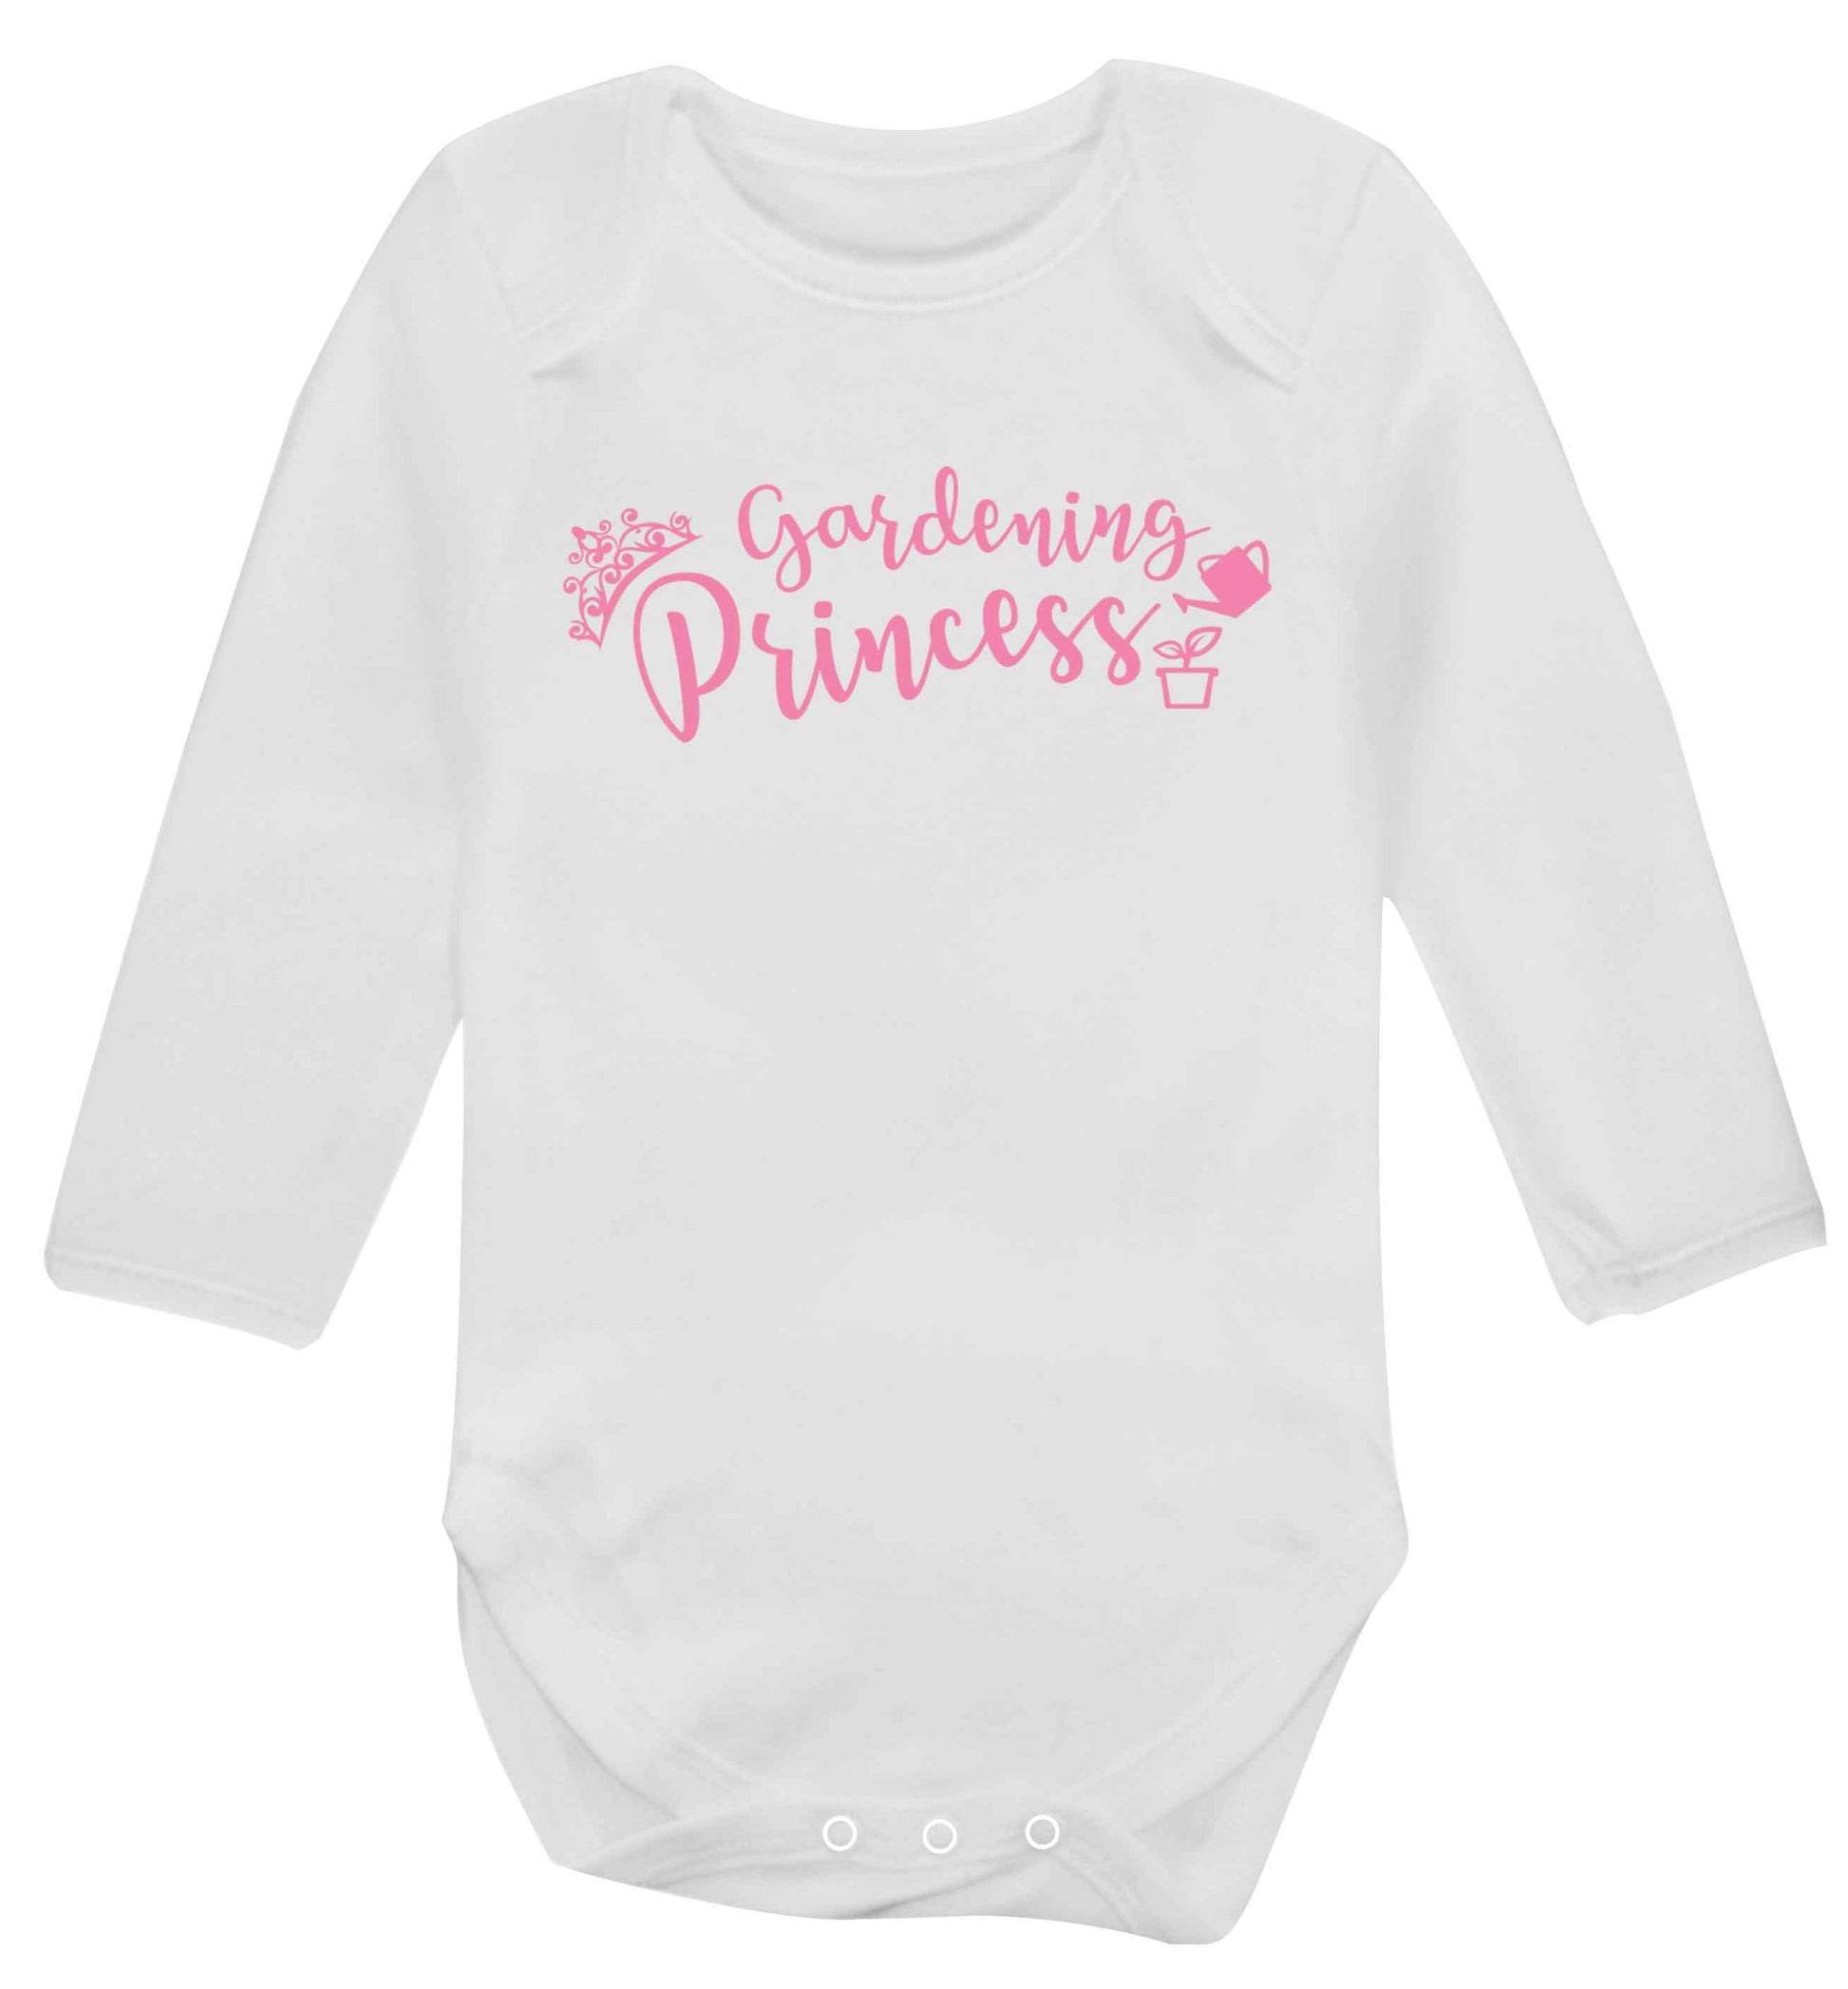 Gardening princess Baby Vest long sleeved white 6-12 months